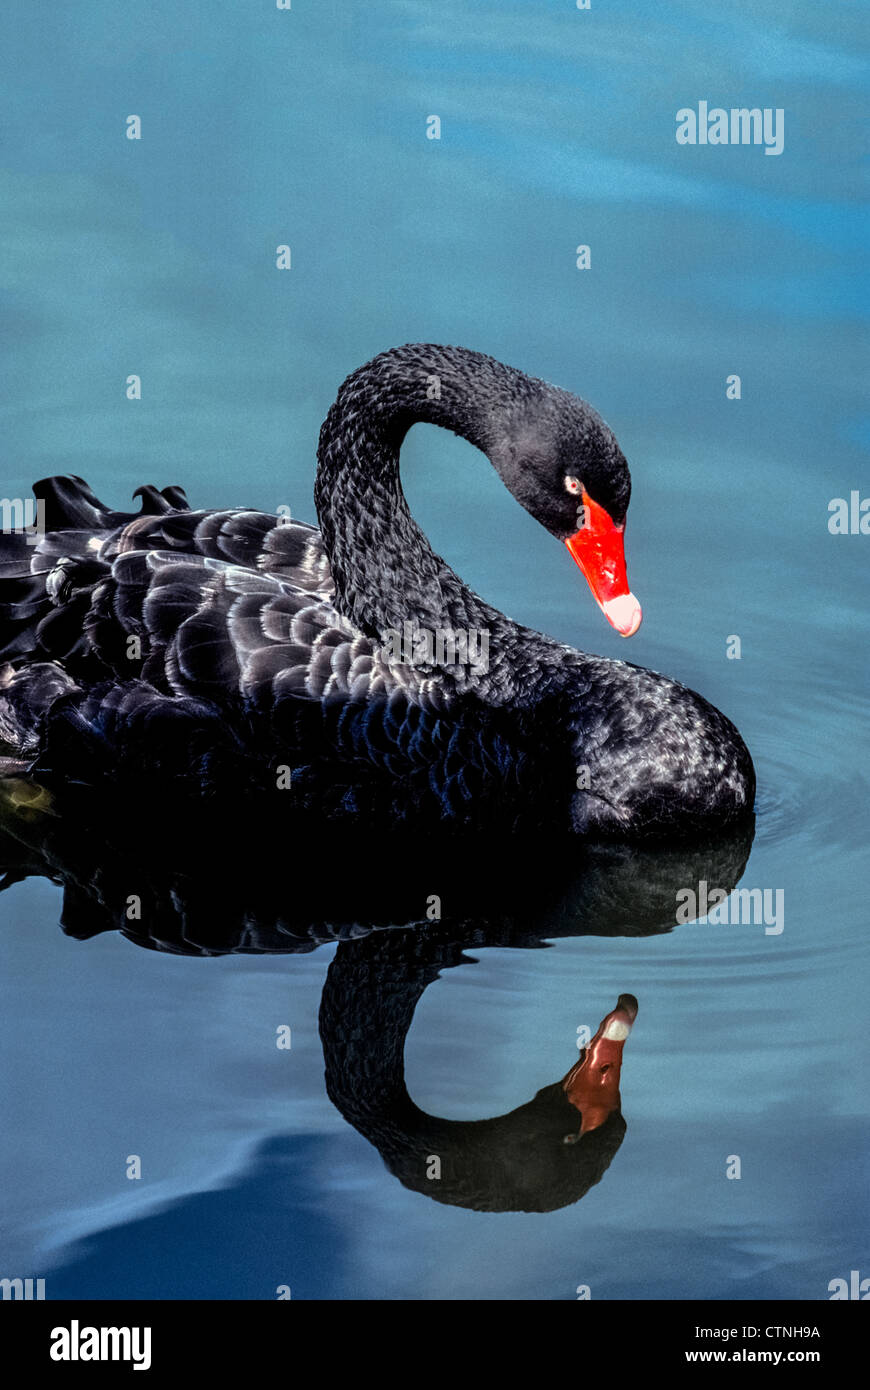 A quiet lake makes a reflection of a floating Black Swan, an exotic waterfowl marked by a bright red bill with a white band near its tip. Stock Photo